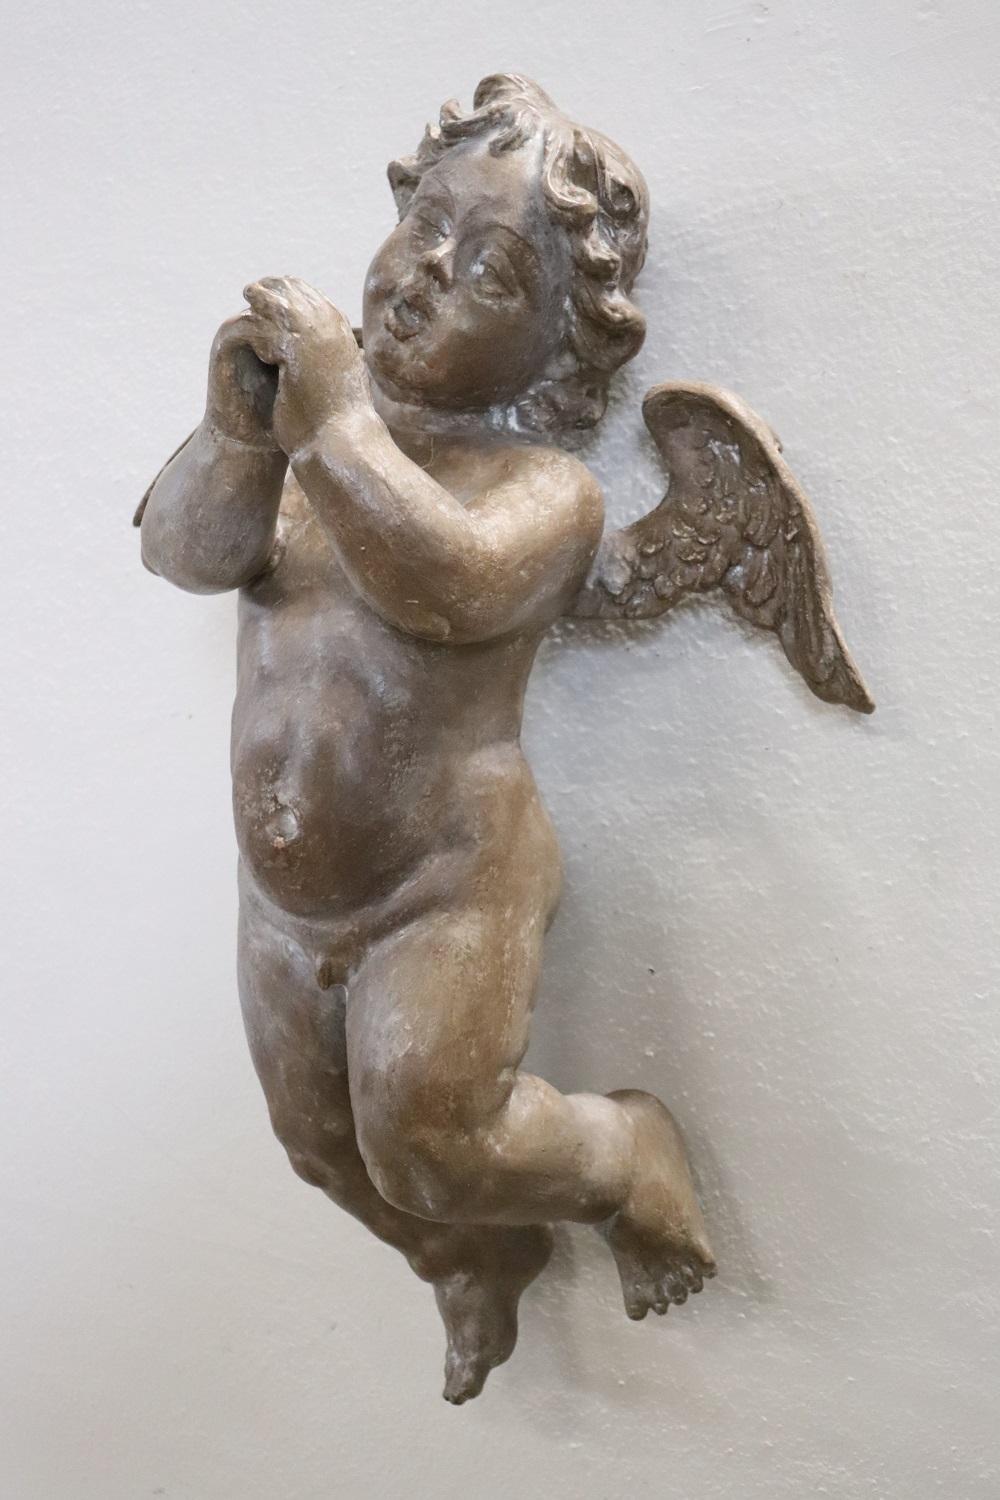 Refined Italian sculpture in composite material recently manufactured. A beautiful pair of cherubs painted with a technique that simulates aging. They are to hang on the wall. Probably one of the two cherubs was holding an element in his hands